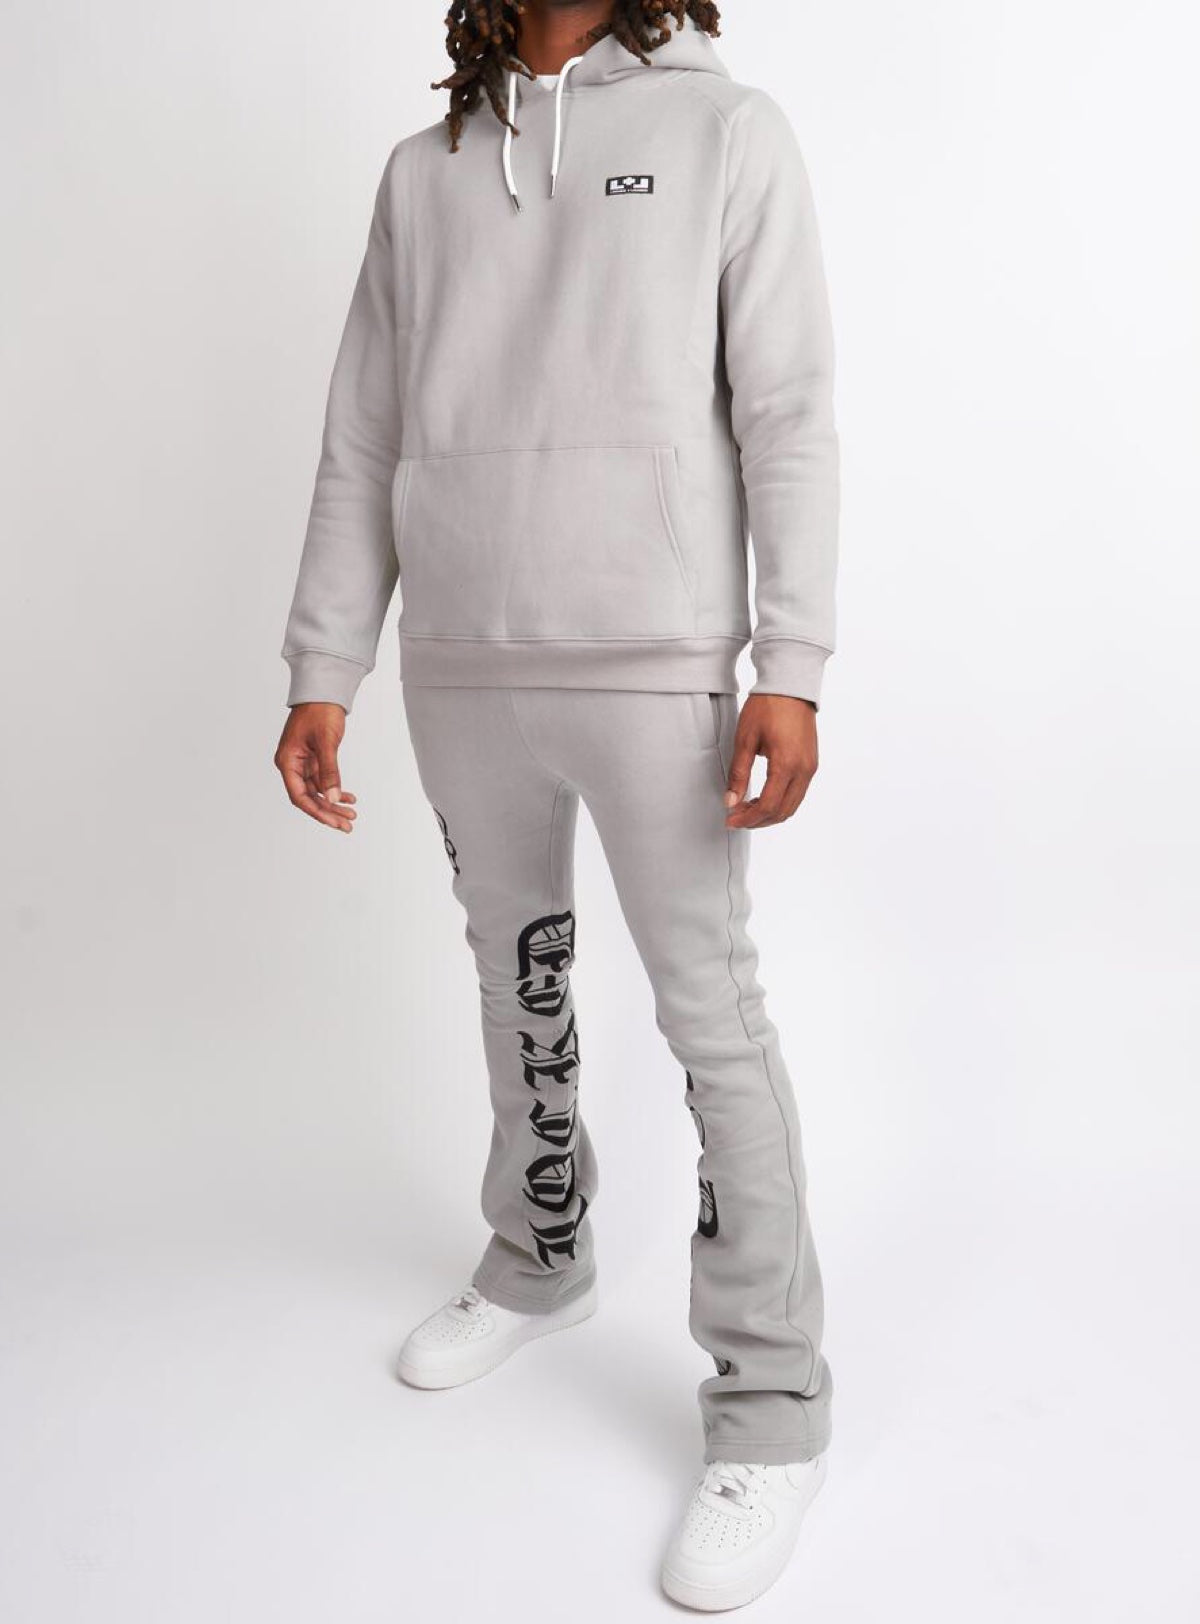 Locked & Loaded Sweatsuit - Chamber - Grey And Black - 353